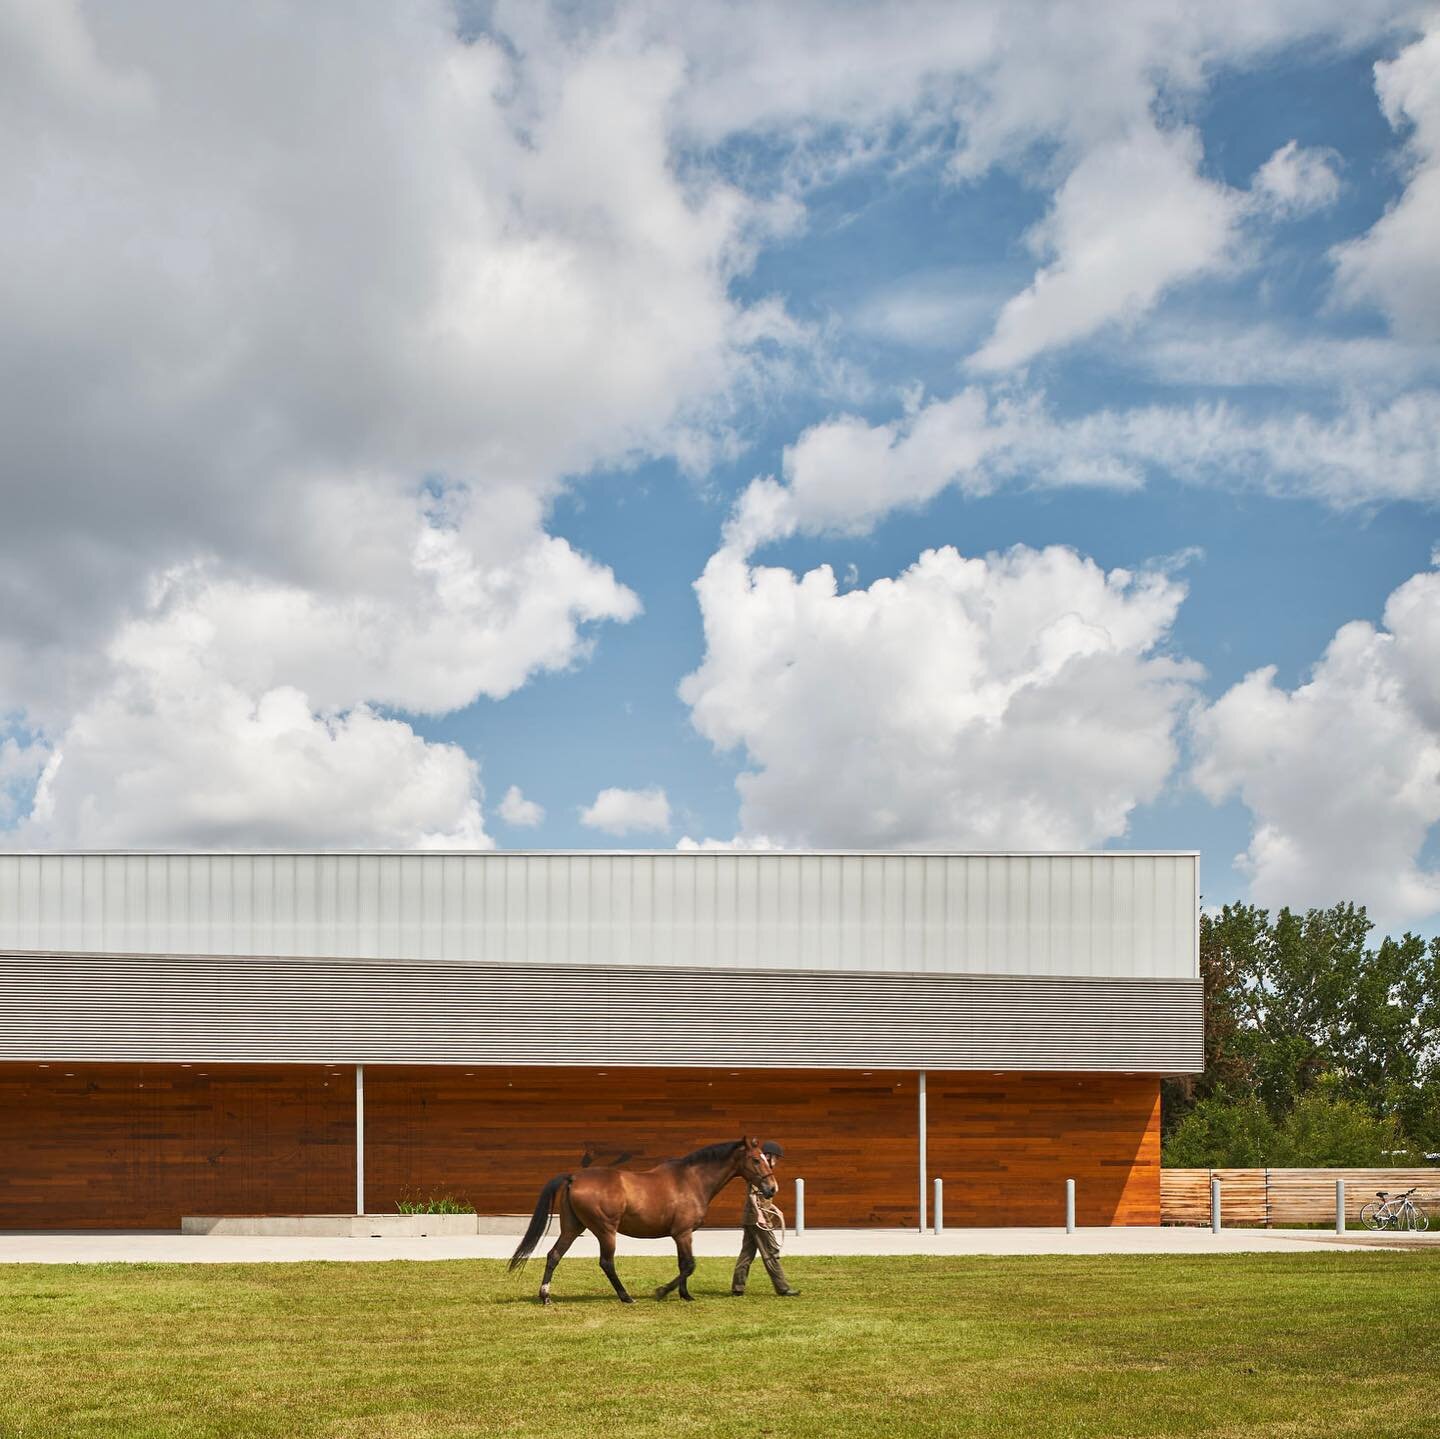 The Whitemud Equine Centre is featured on ArchDaily @archdaily. See the link in our bio.

Photos by @2spacephoto

#architecture&nbsp;#yegarchitecture&nbsp;#yegdt&nbsp;#design&nbsp;#yegdesign&nbsp;#archdaily&nbsp;#yeg #equestrian #equestrianstyle #equ